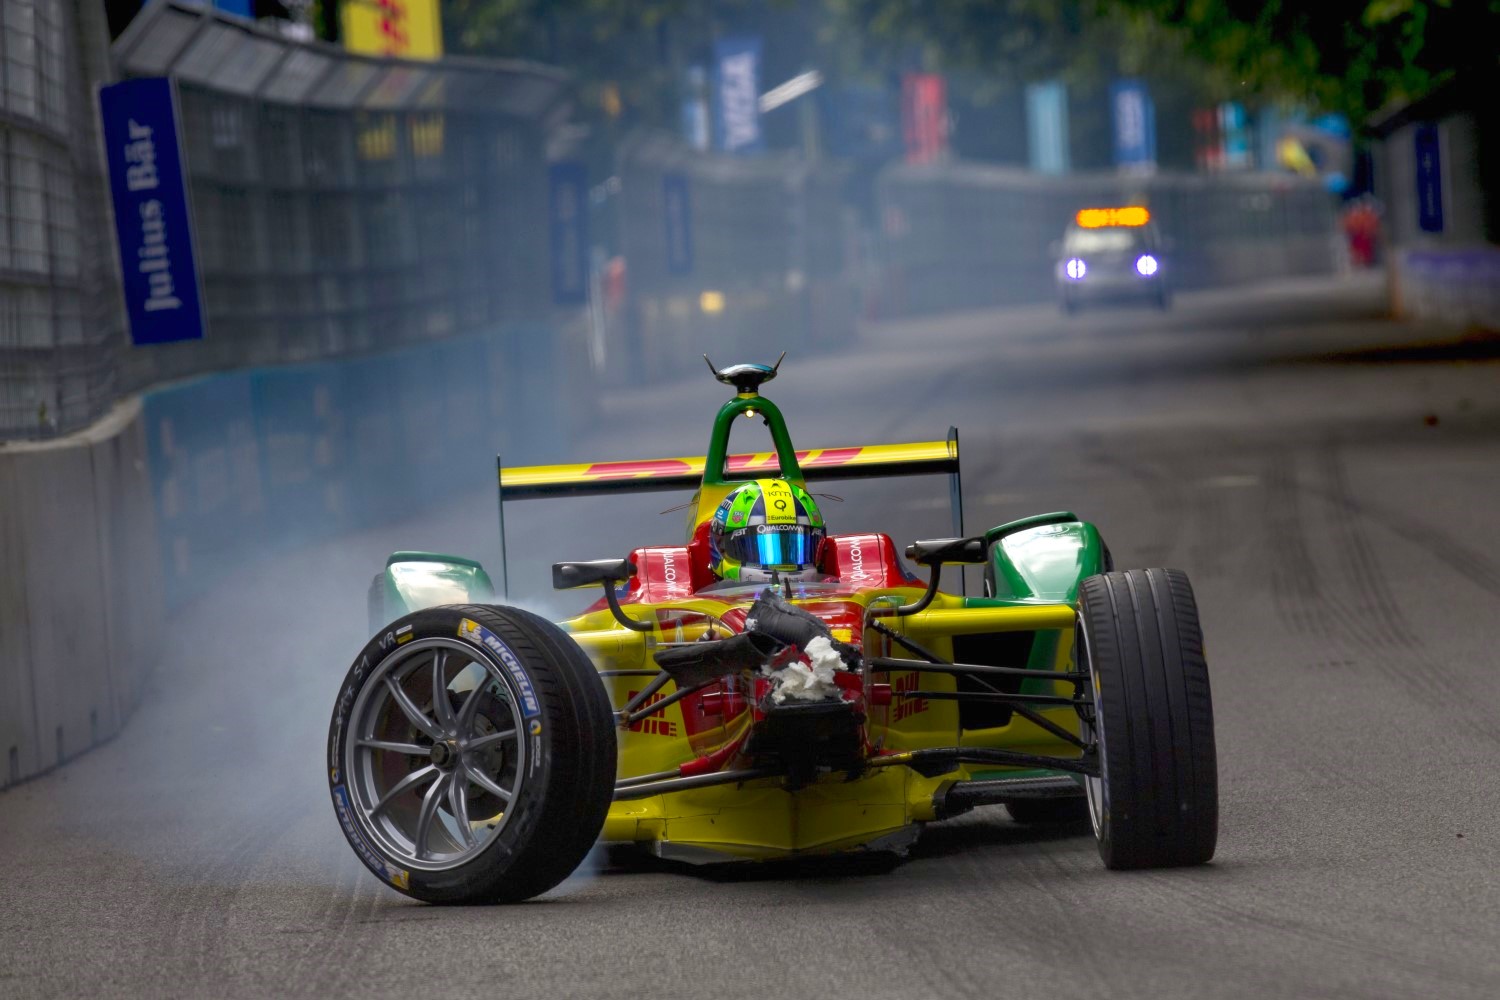 di Grassi's car after running into the back of Buemi